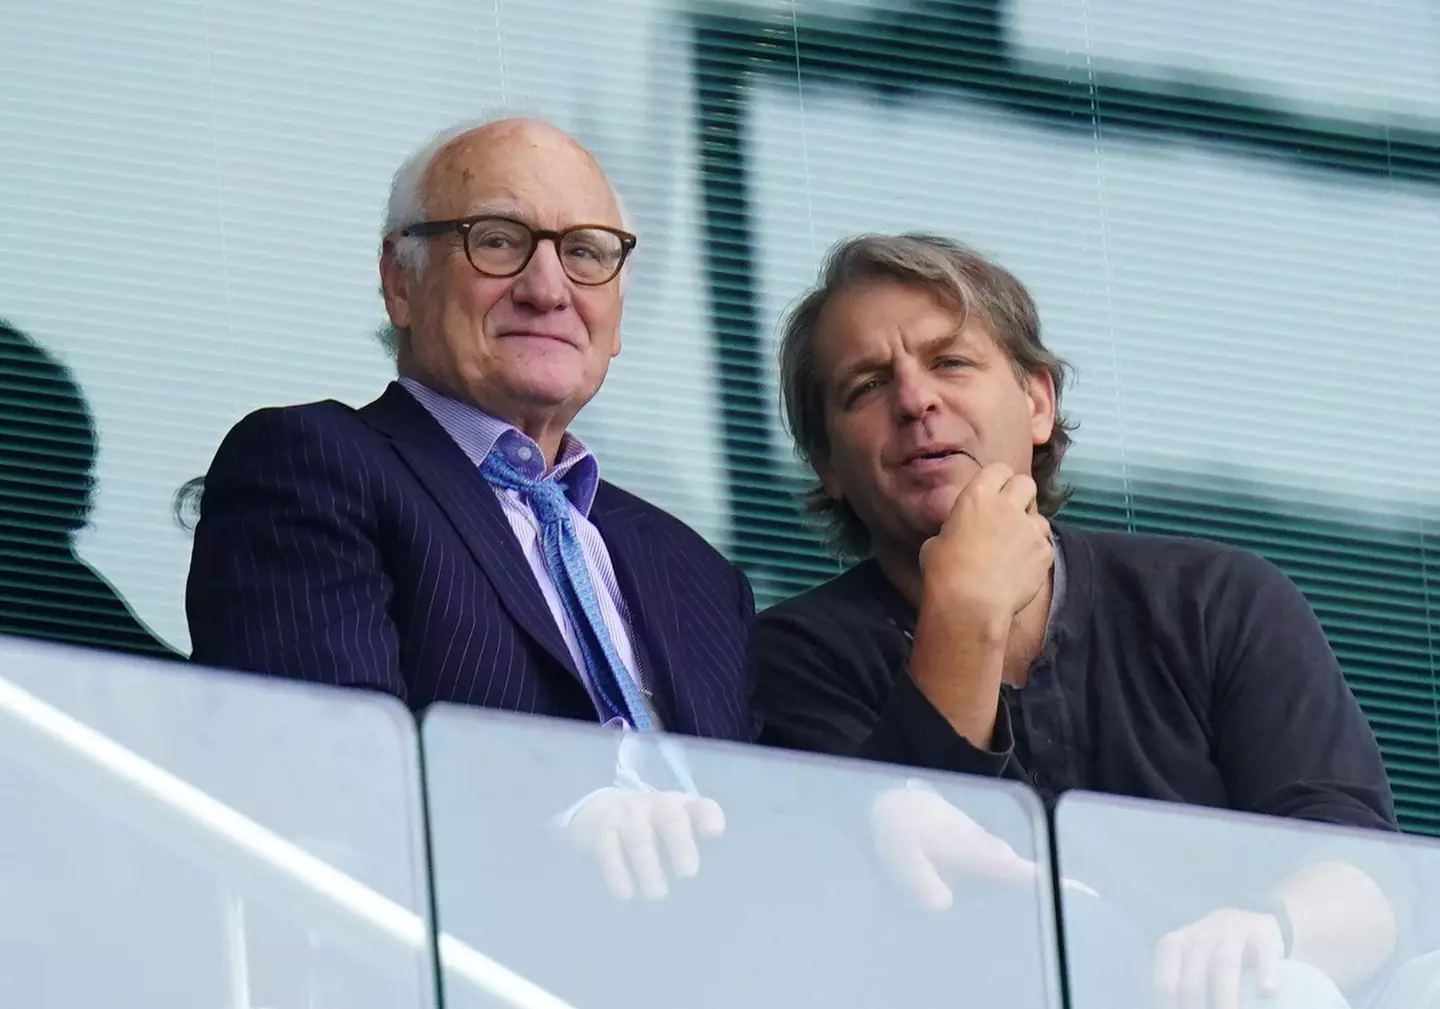 Chelsea chairman Bruce Buck (left) and co-owner Todd Boehly. (Alamy)